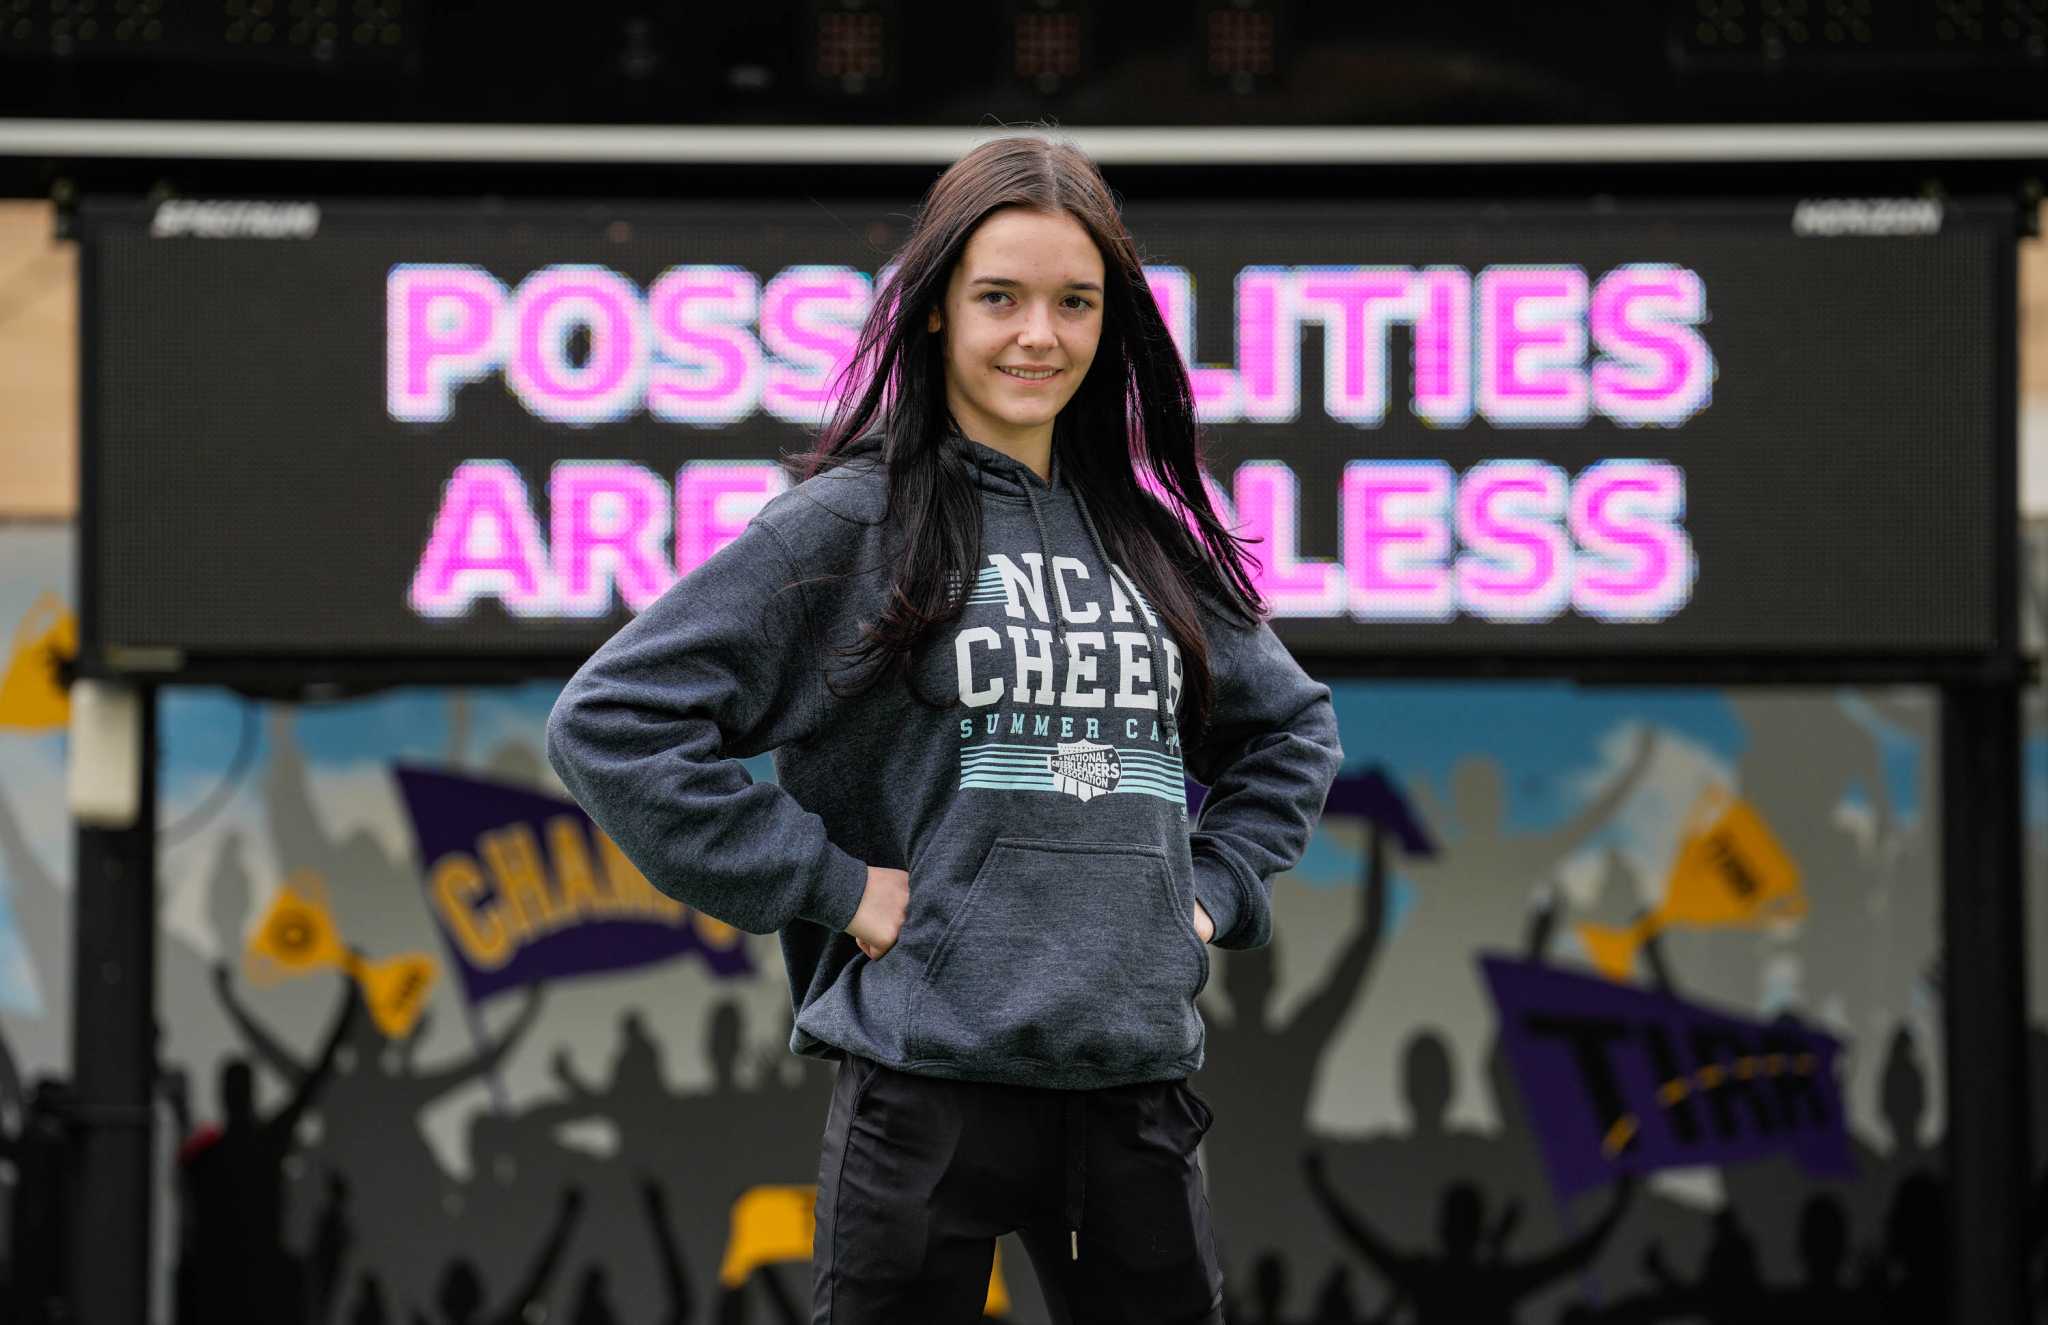 After car wreck, cheerleader learns to walk, talk and cheer again